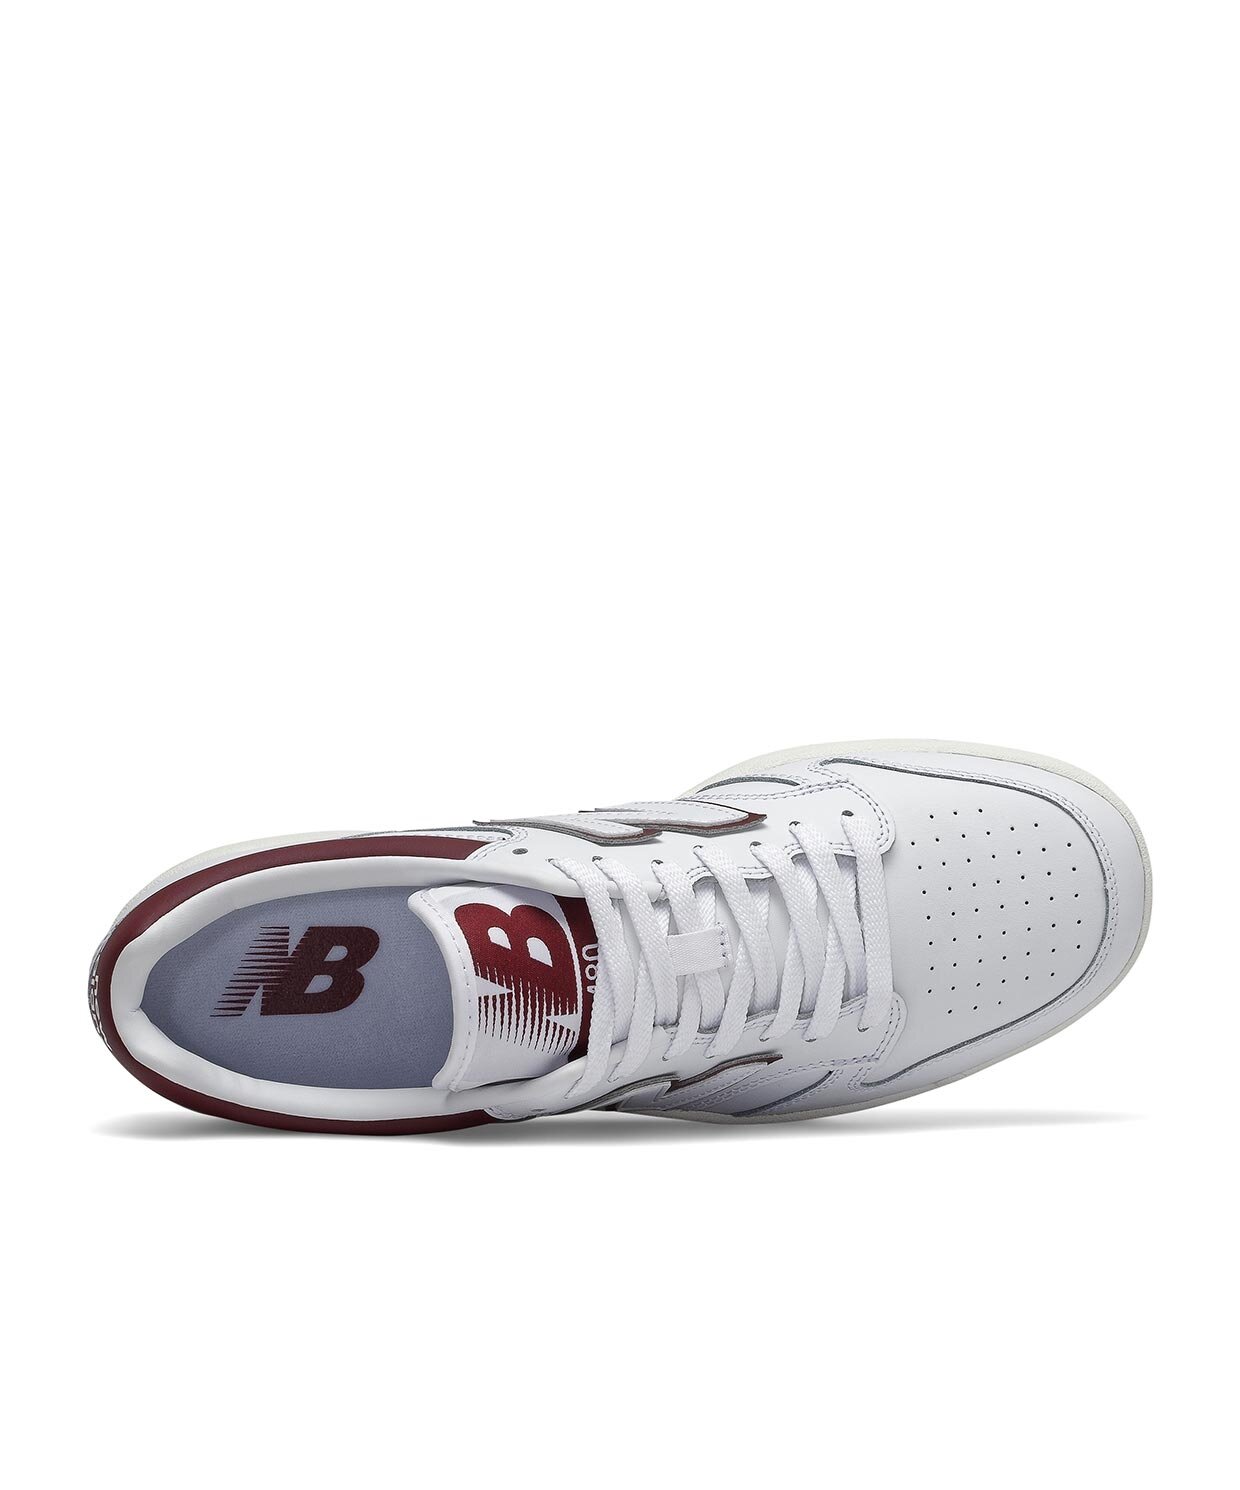 resm New Balance 480 Lifestyle Mens Shoes